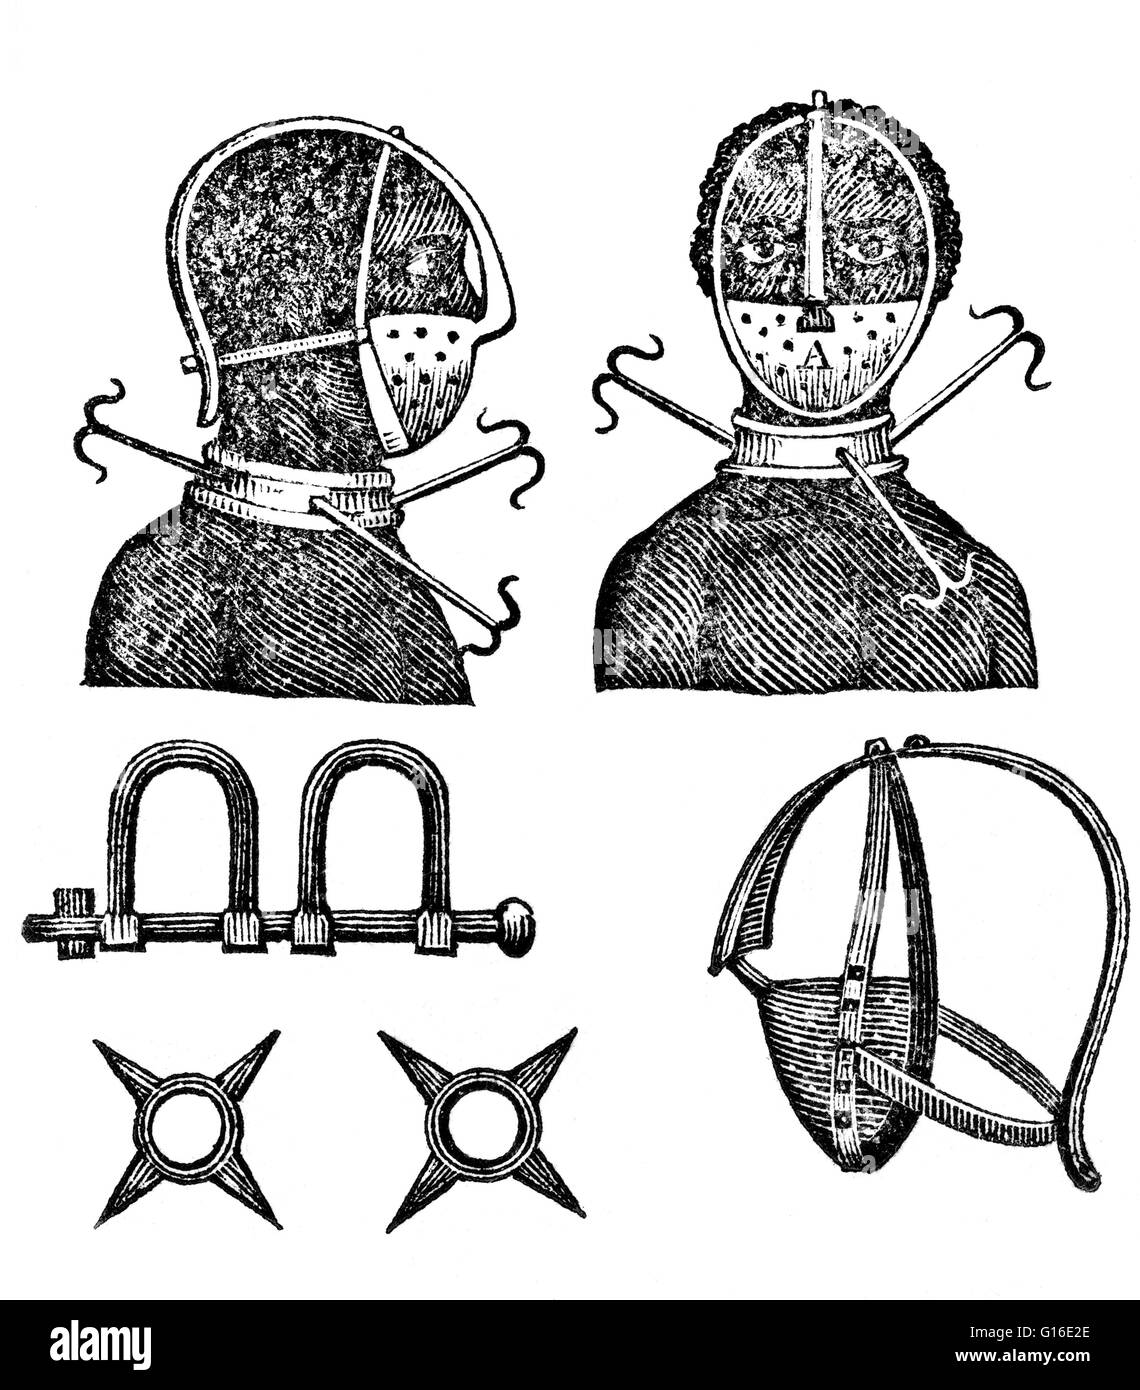 Entitled: 'Iron mask, collar, leg shackles and spurs used to restrict slaves.' The Atlantic slave trade took place across the Atlantic Ocean from the 16th through to the 19th centuries. The majority of those enslaved that were transported to the New World Stock Photo